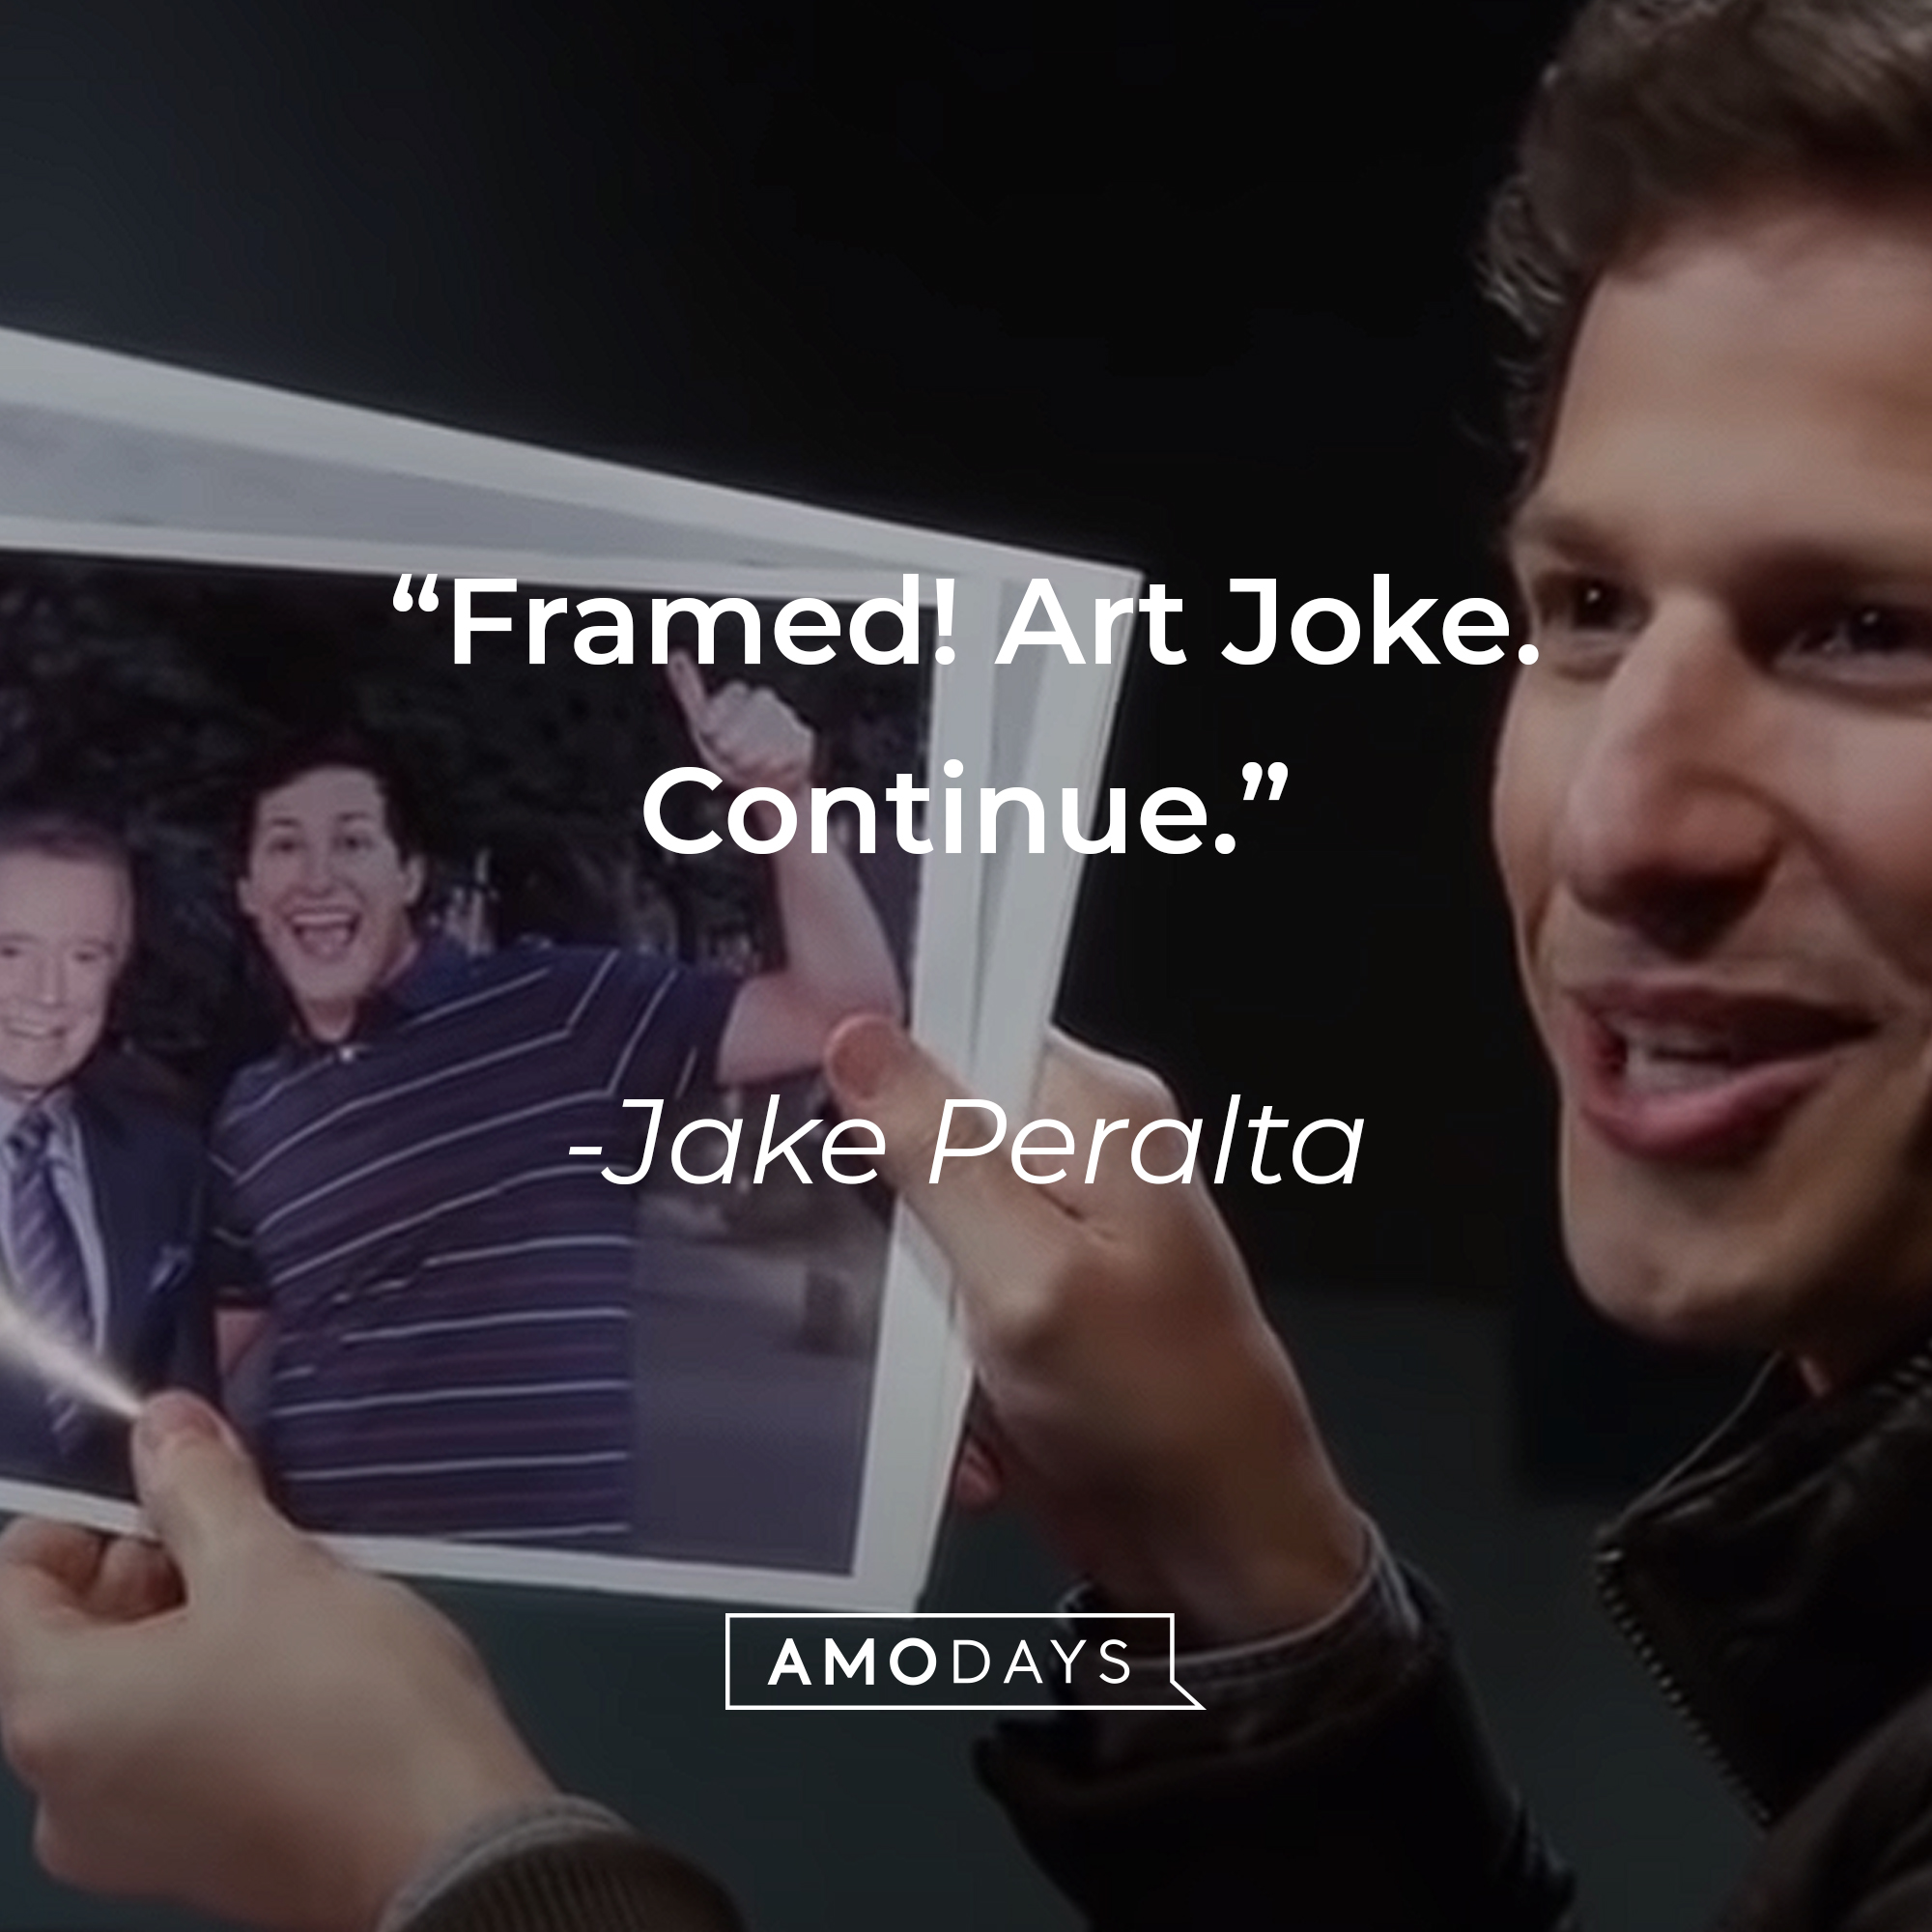 A picture of Jake Peralta with his quote: "Framed! Art Joke. Continue." |Source: youtube.com/NBCBrooklyn99